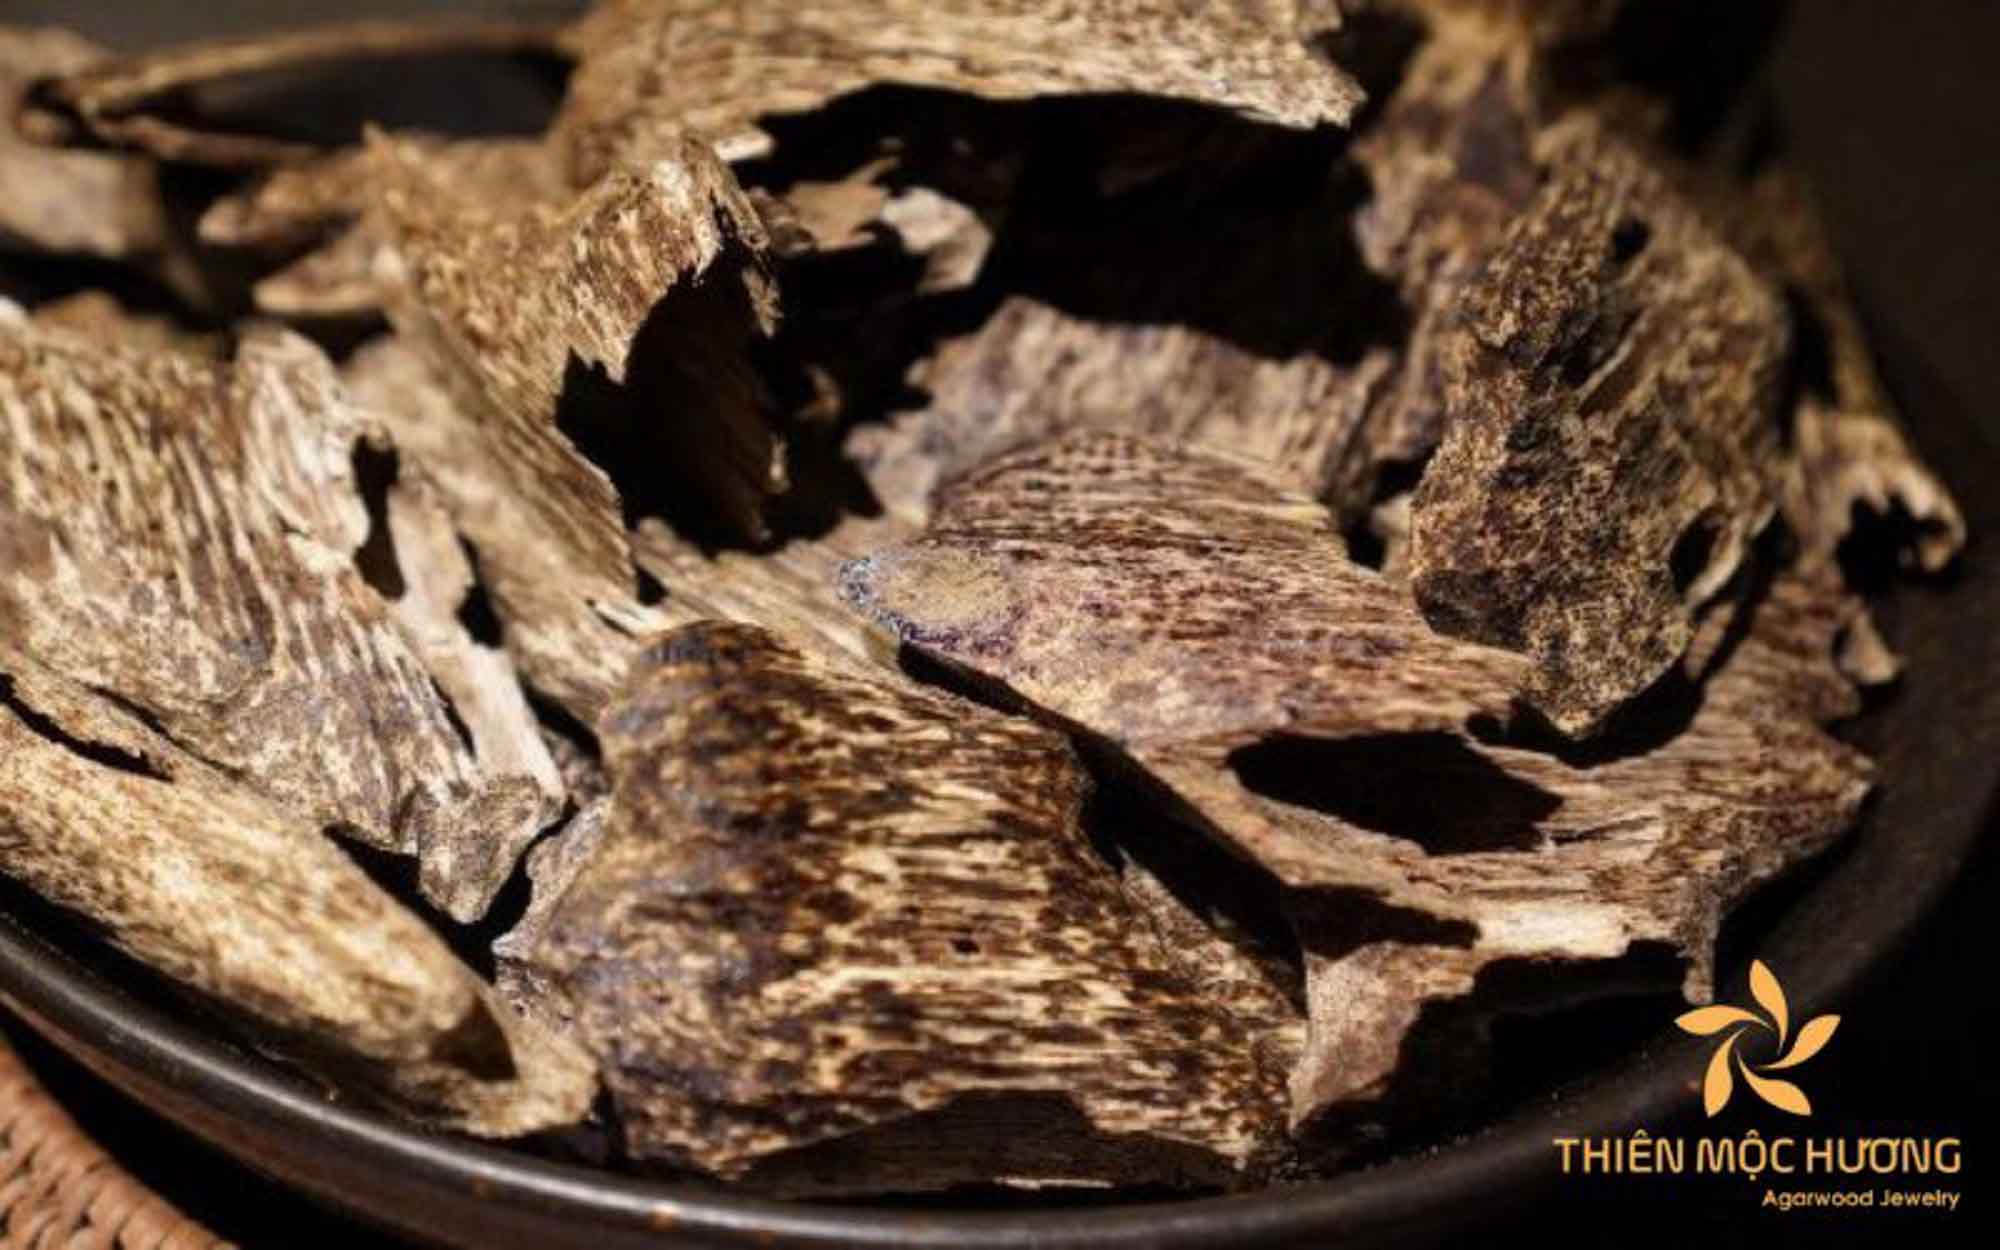 The process of making Agarwood chips for sale